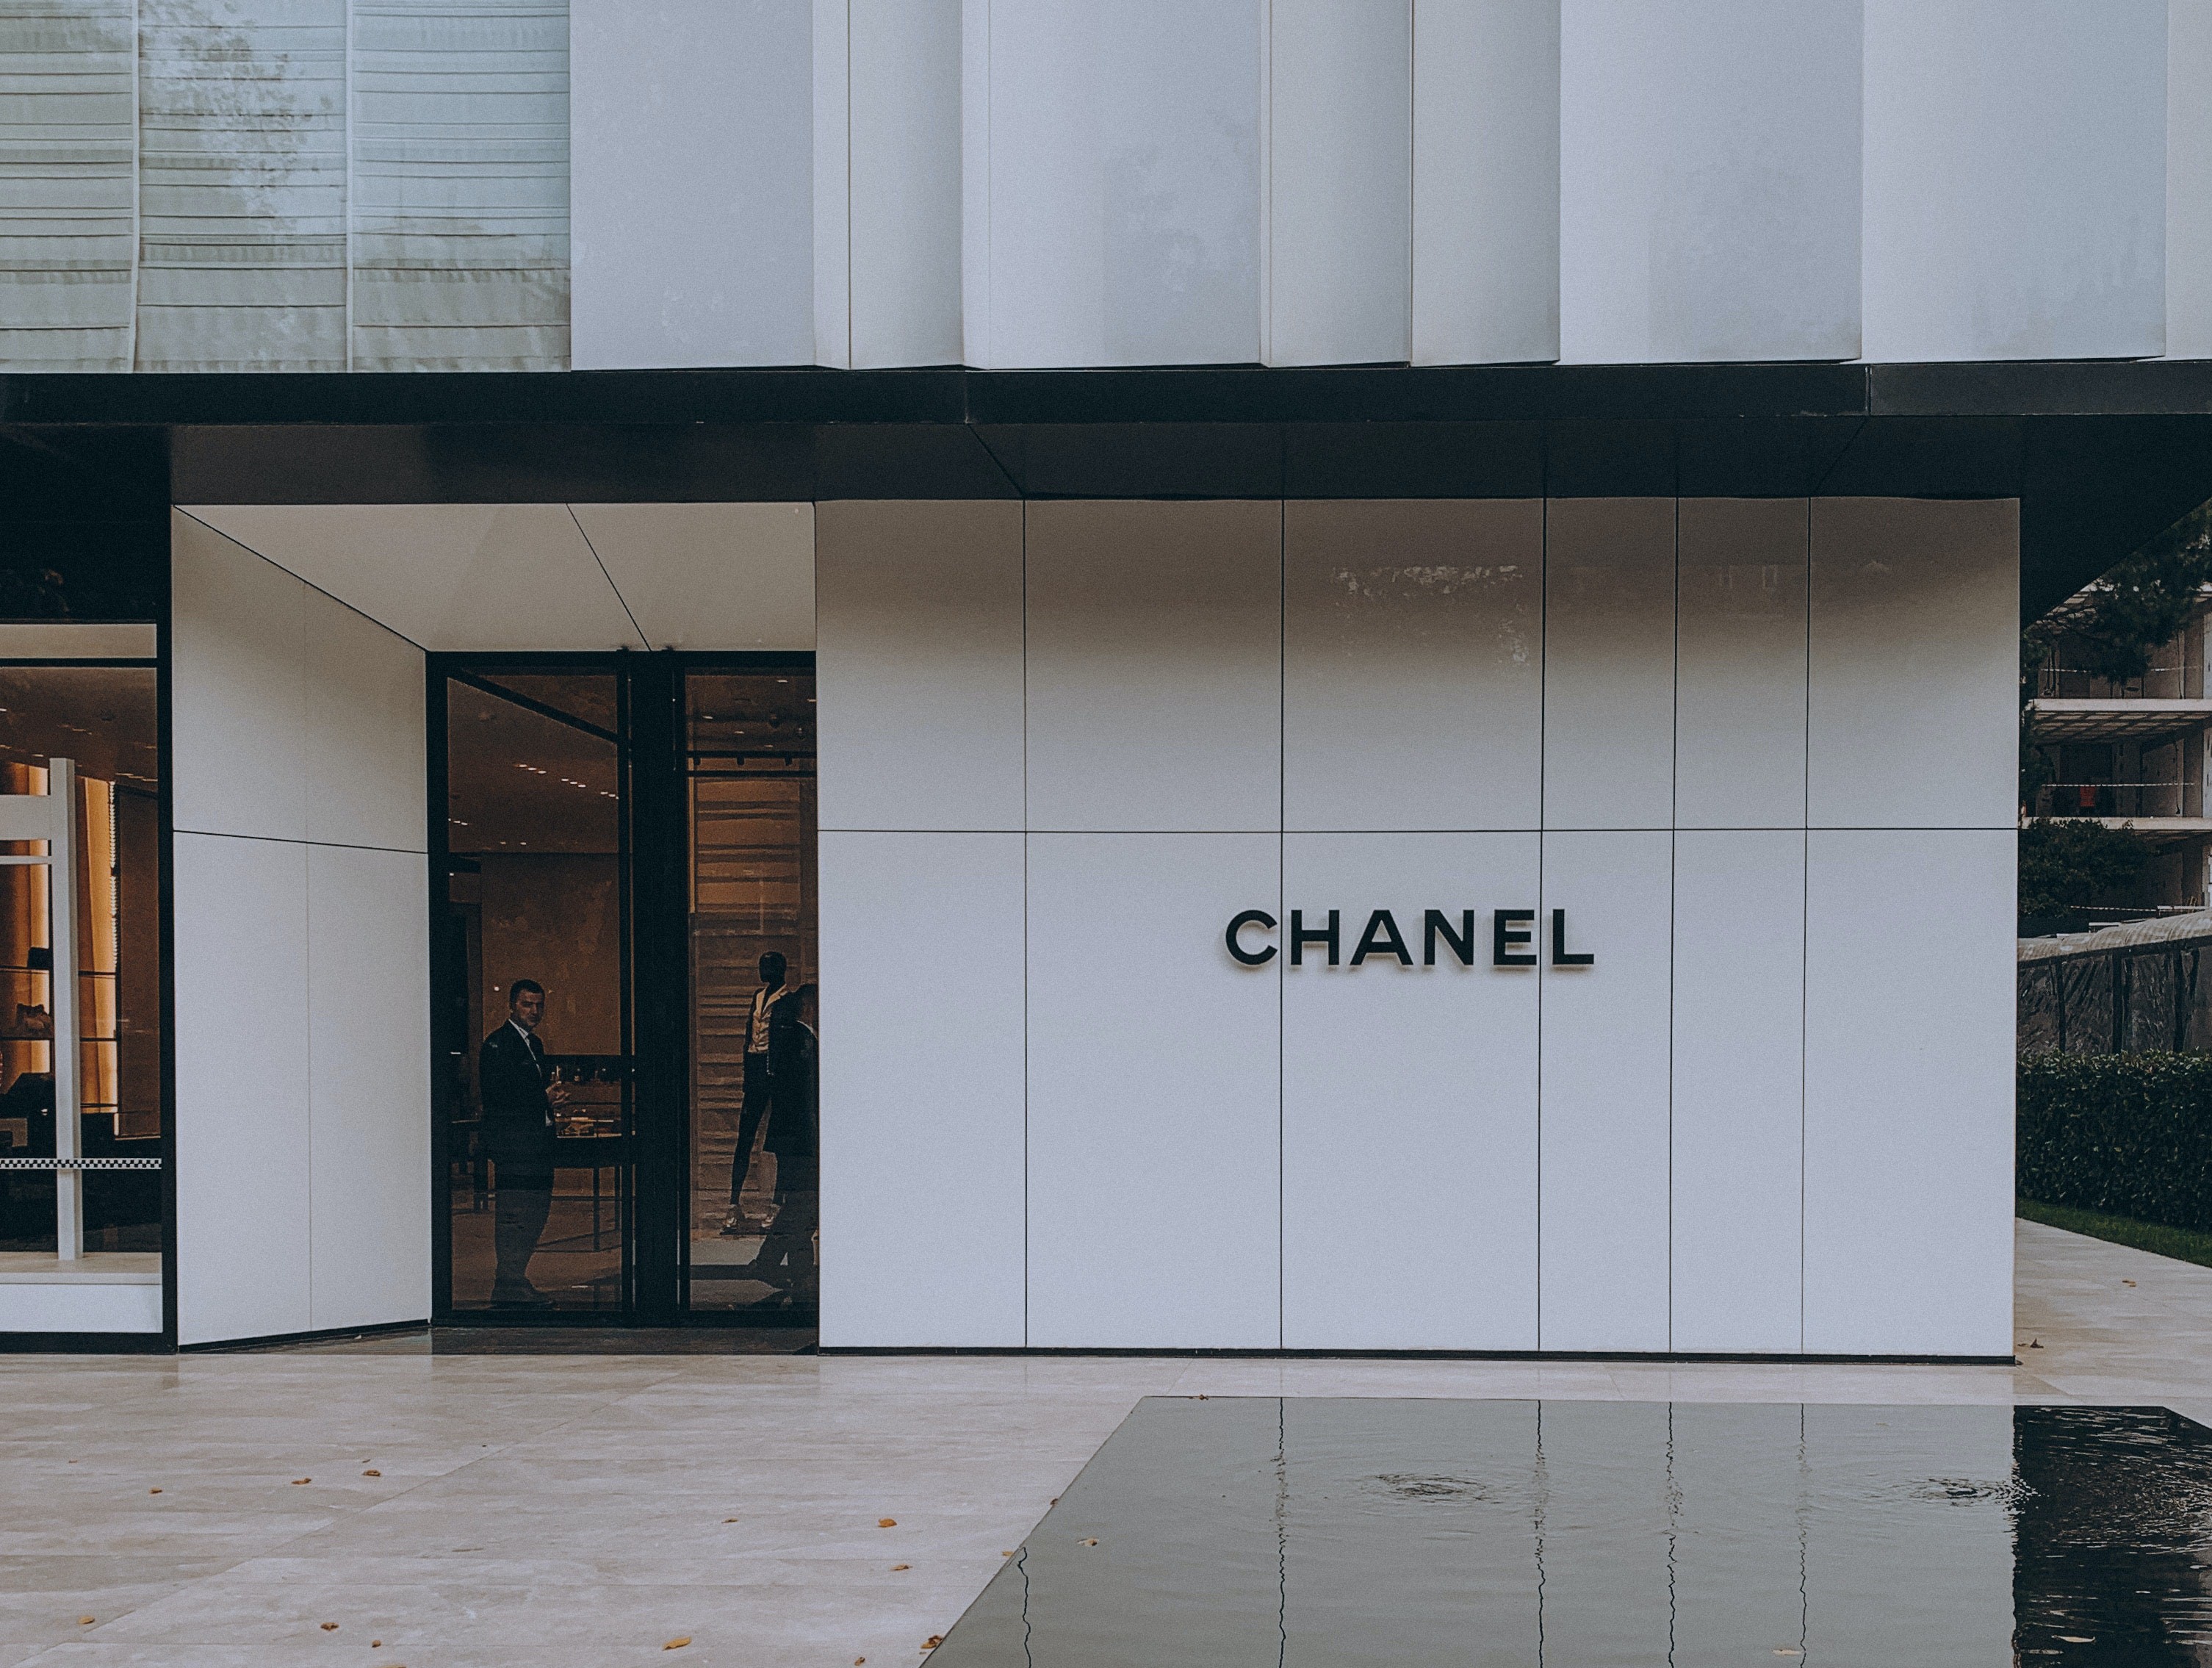 CHANEL CFO: 'The finance department is central to making the ESG agenda  happen' - I by IMD